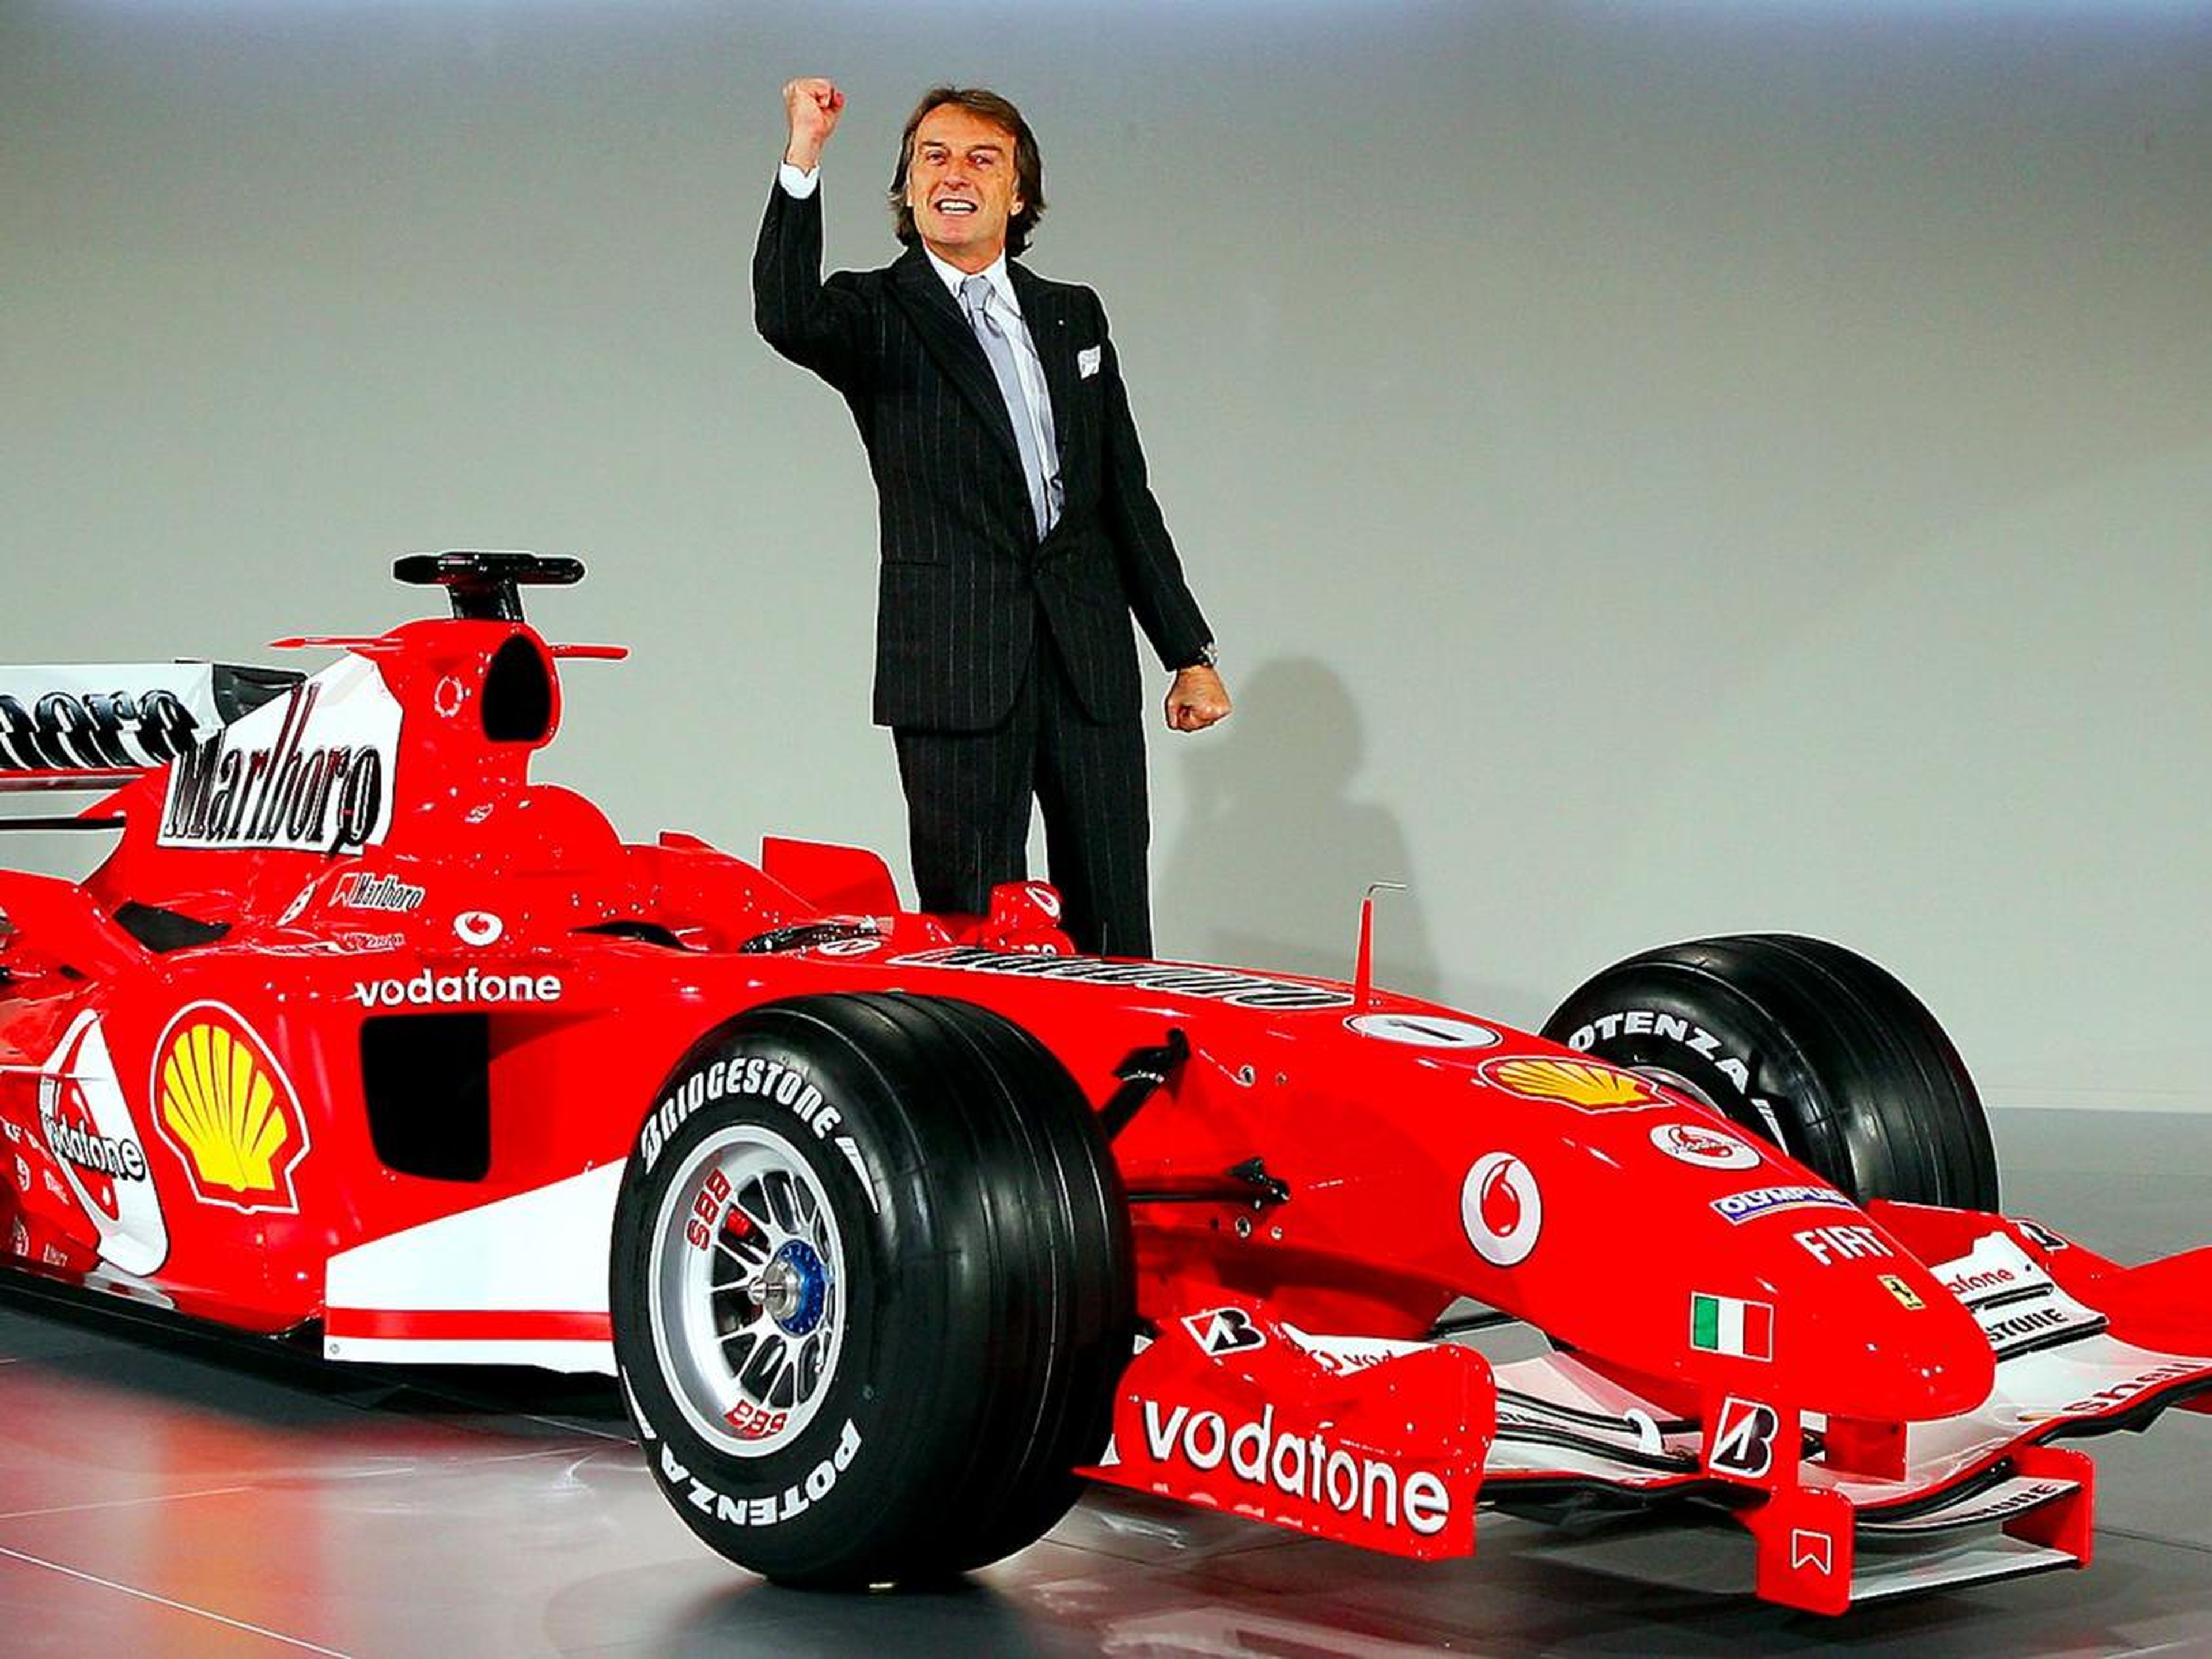 After the passing of Enzo Ferrari, longtime executive Luca di Montezemolo assumed the position of President and later Chairman. Under his guidance, Ferrari was transformed into a global luxury brand.